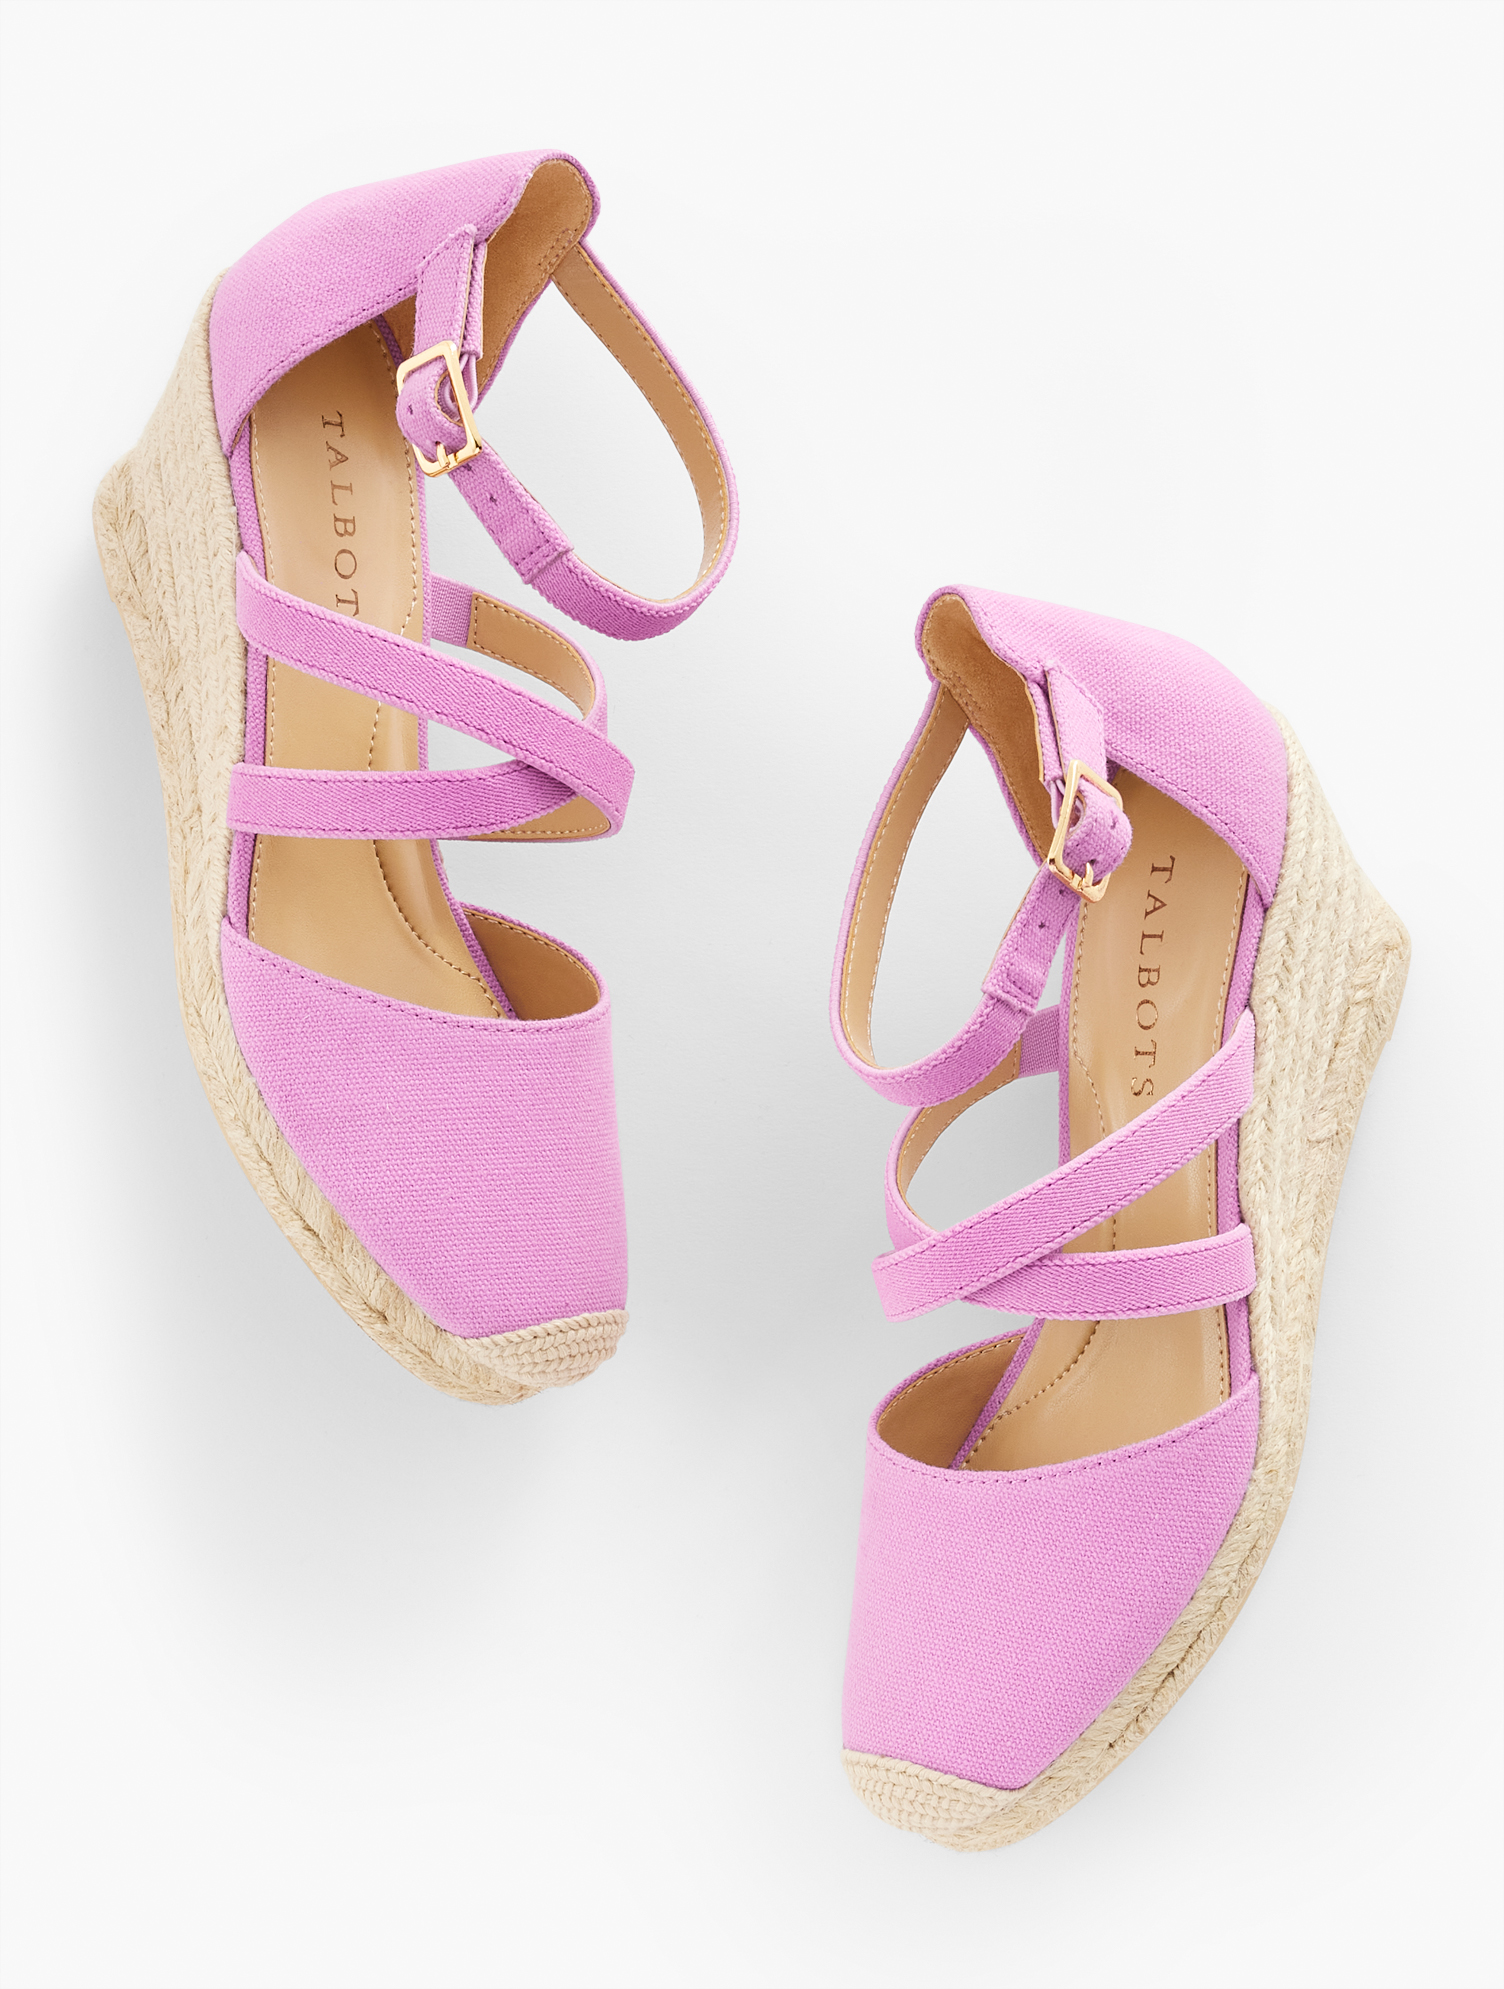 Talbots Lyndsay Strappy Canvas Espadrille Wedges - Orchid Bloom - 8m - 100% Cotton